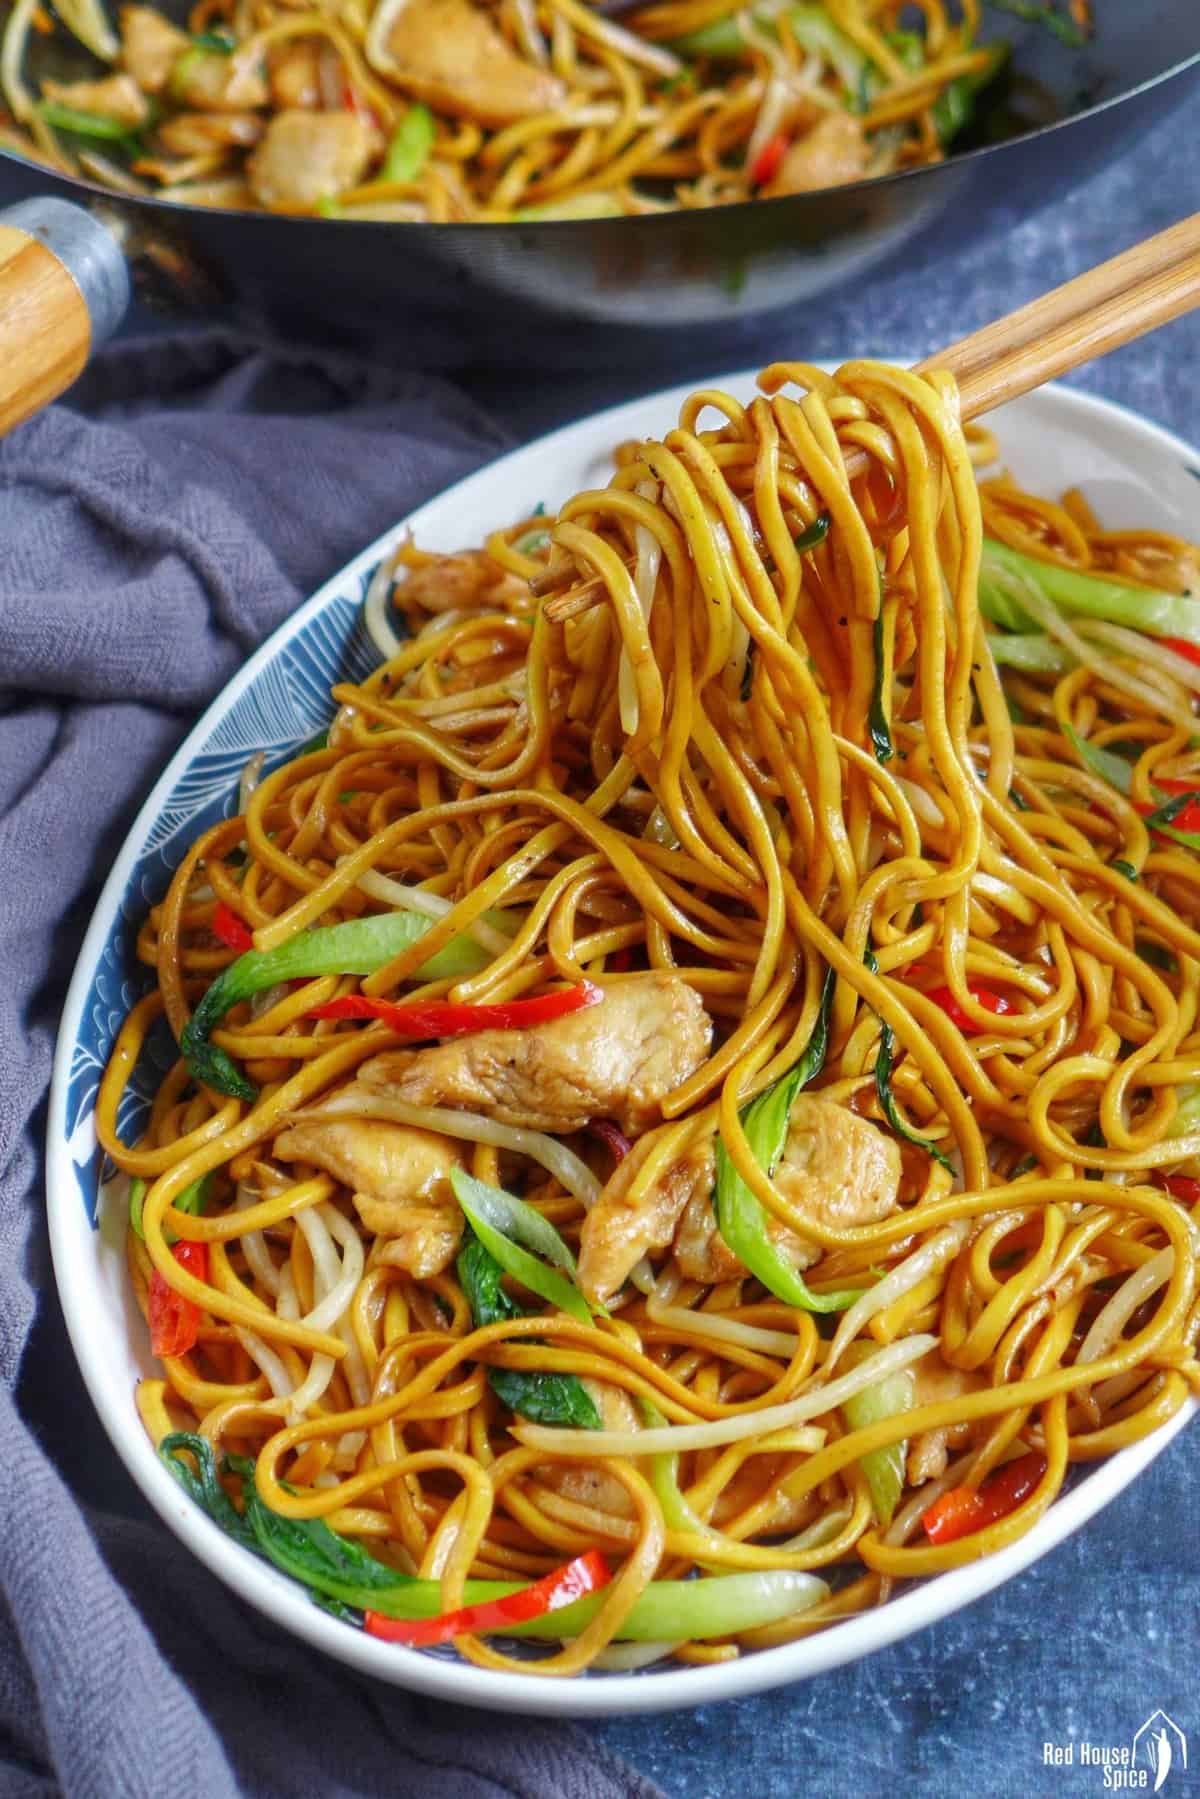 What Are Chinese Fried Noodles?